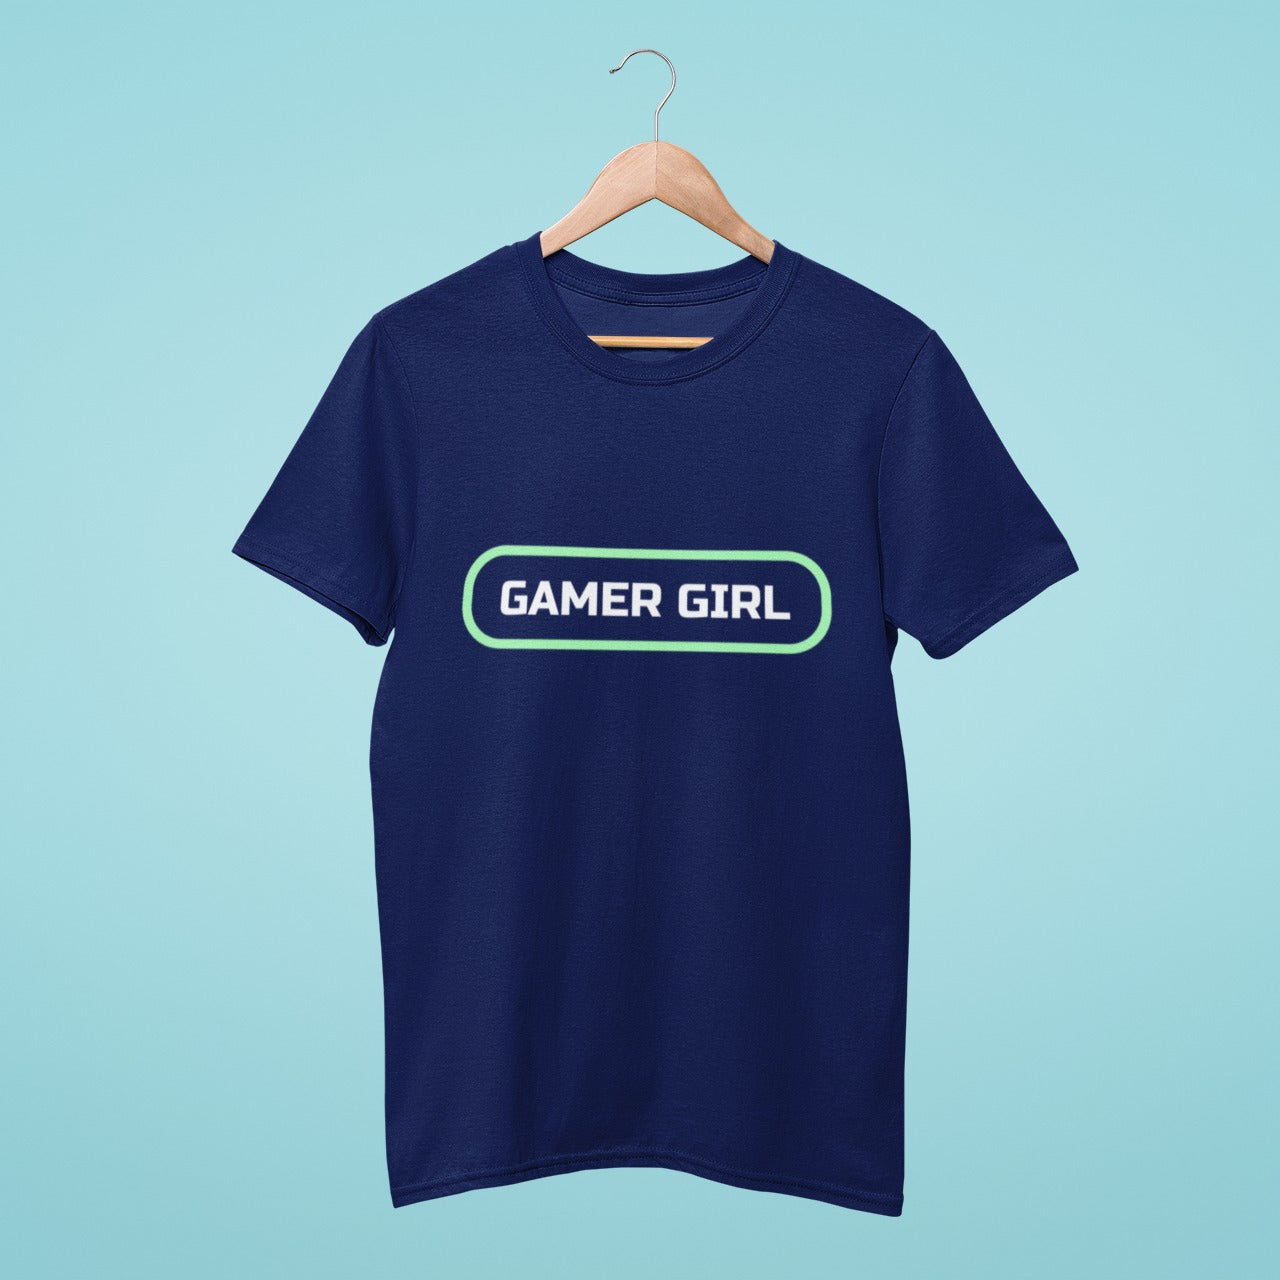 Level up your style with this navy blue t-shirt featuring 'Gamer Girl' written like a game button. Perfect for showing off your passion for gaming in a fashionable way. Get yours now!